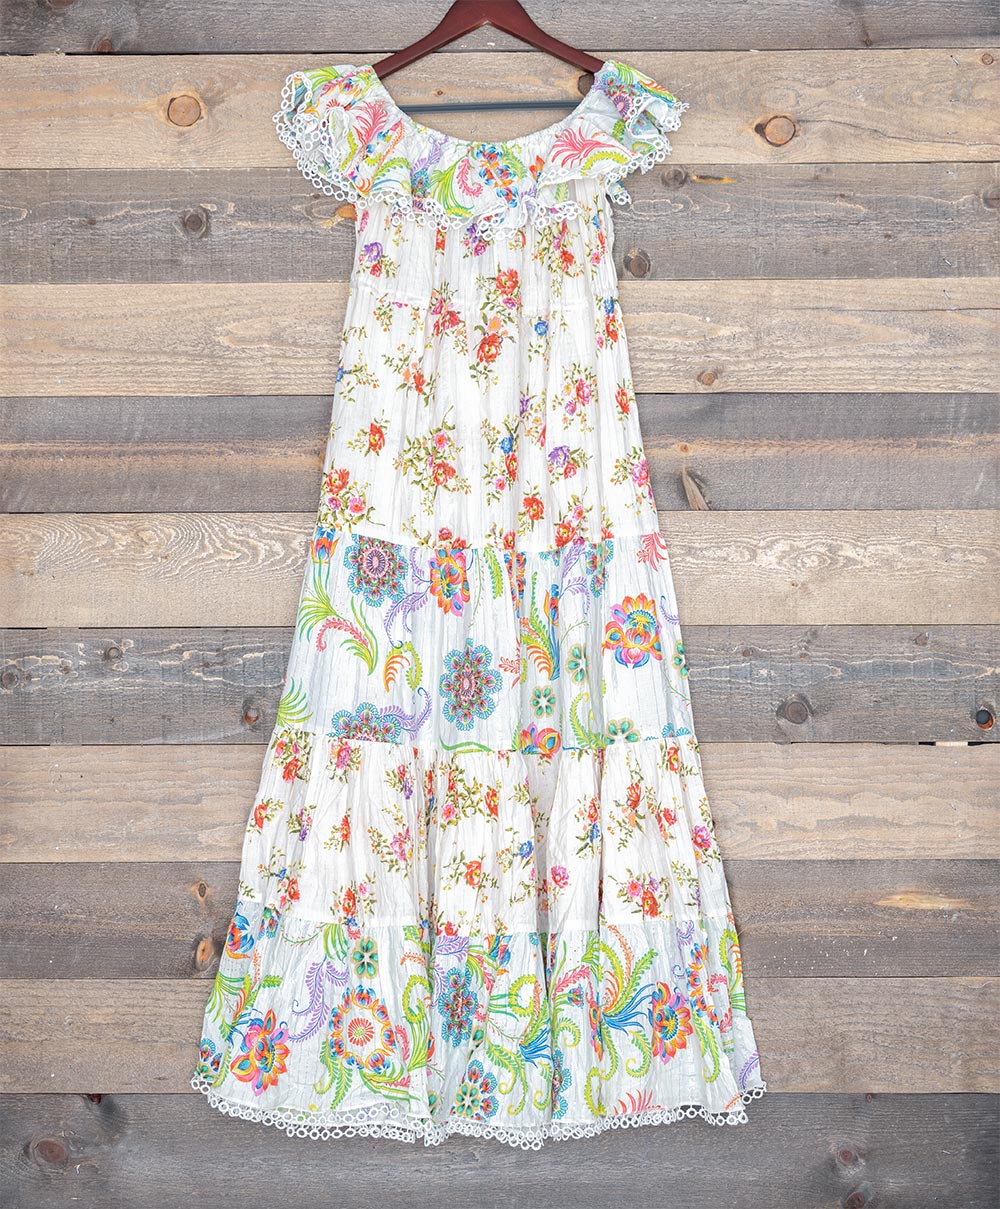 Back view of Ranee's White Cotton Lurex Floral Dress against a wooden backdrop